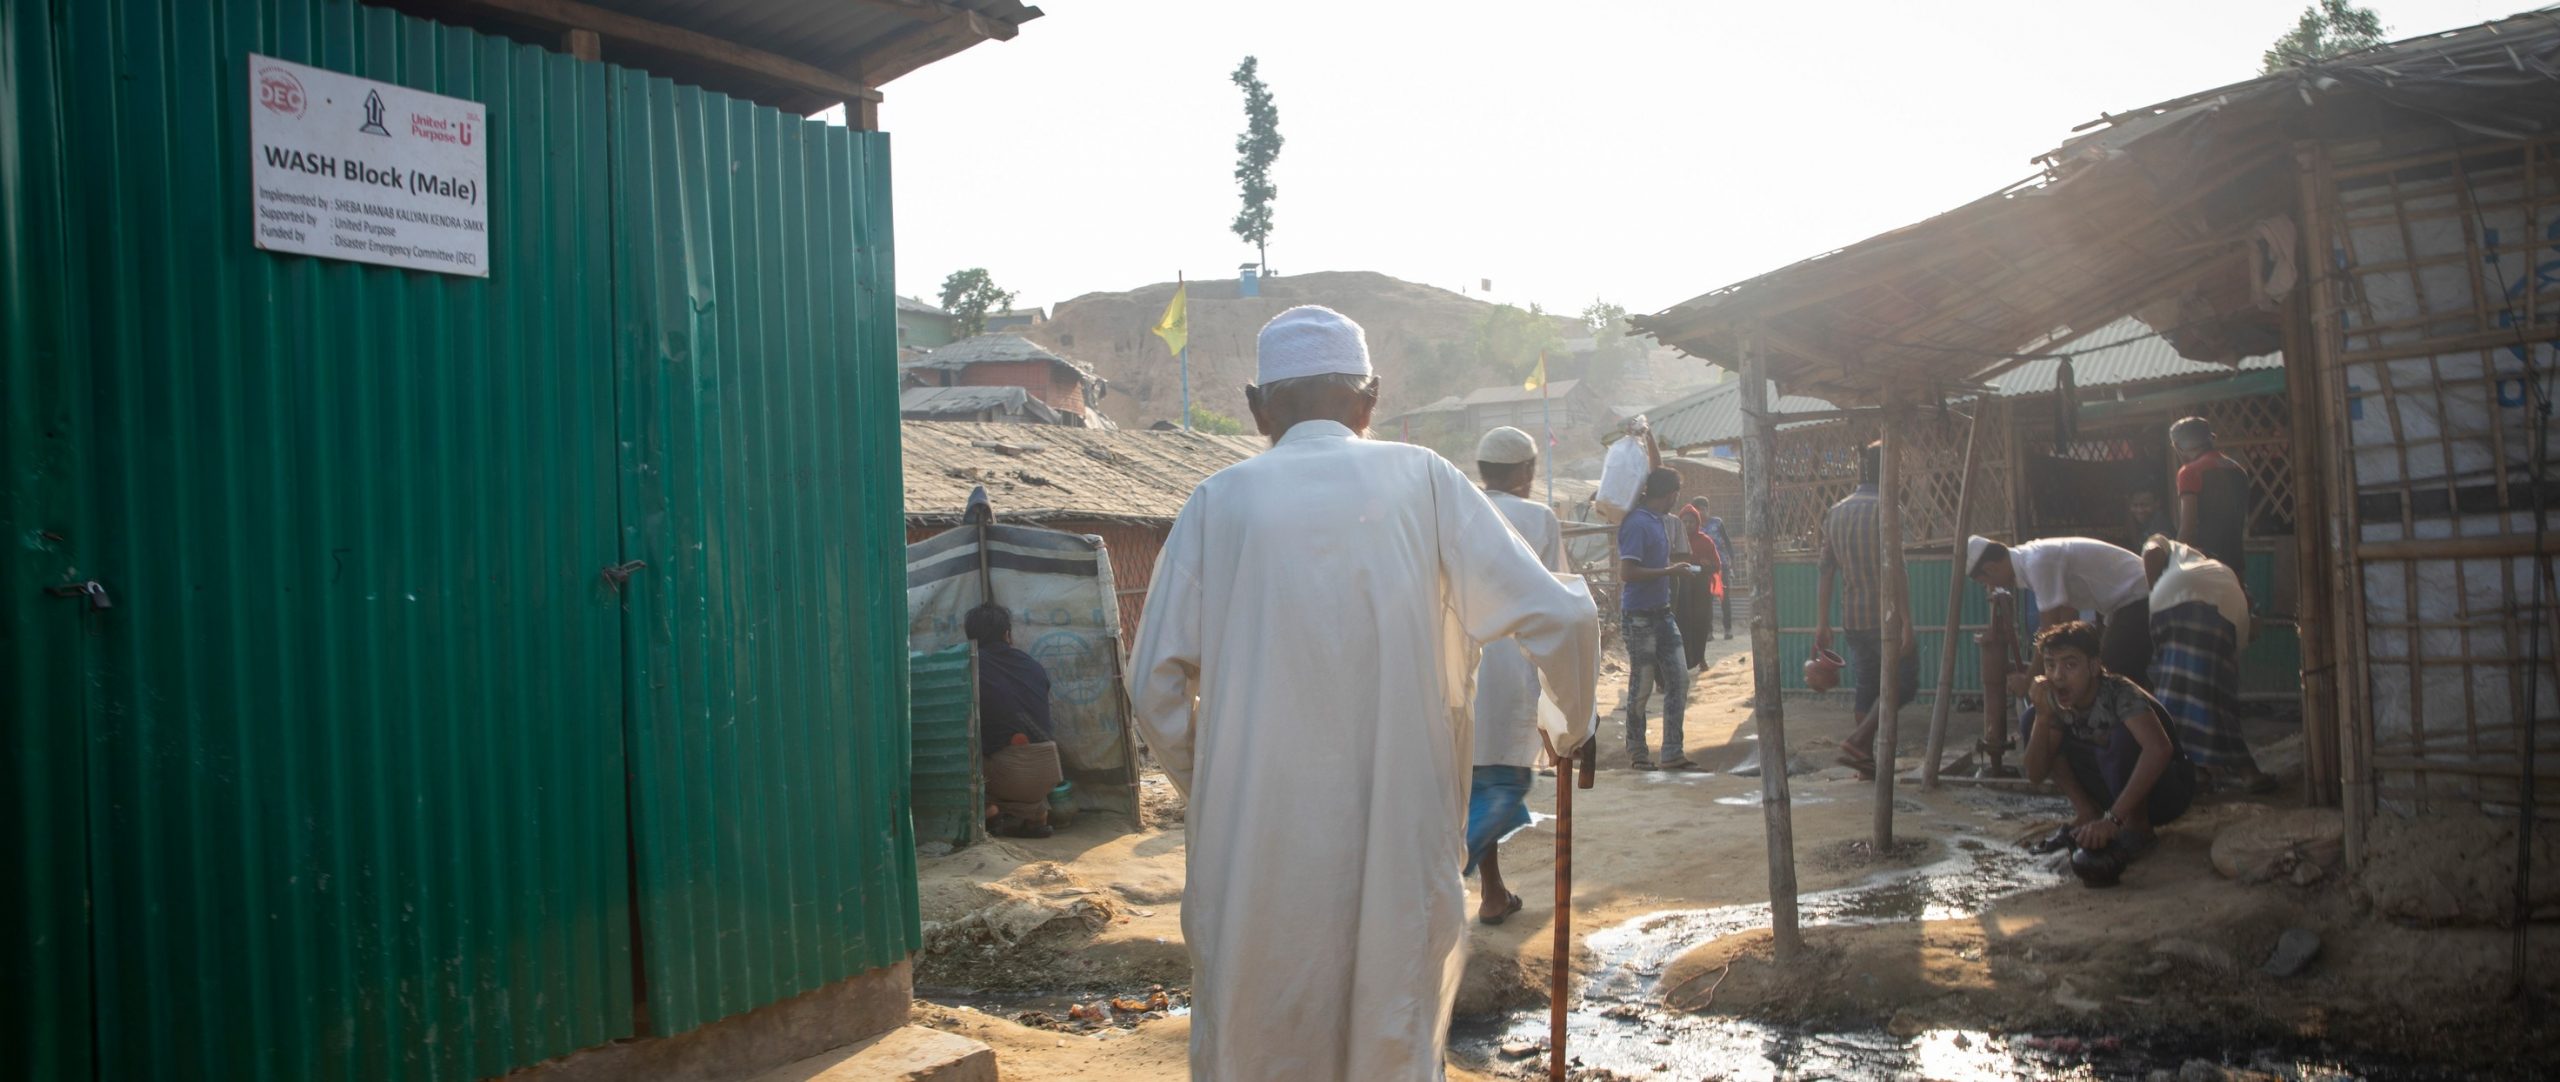 Bangladesh: COVID-19 response flaws put older Rohingya refugees in imminent danger